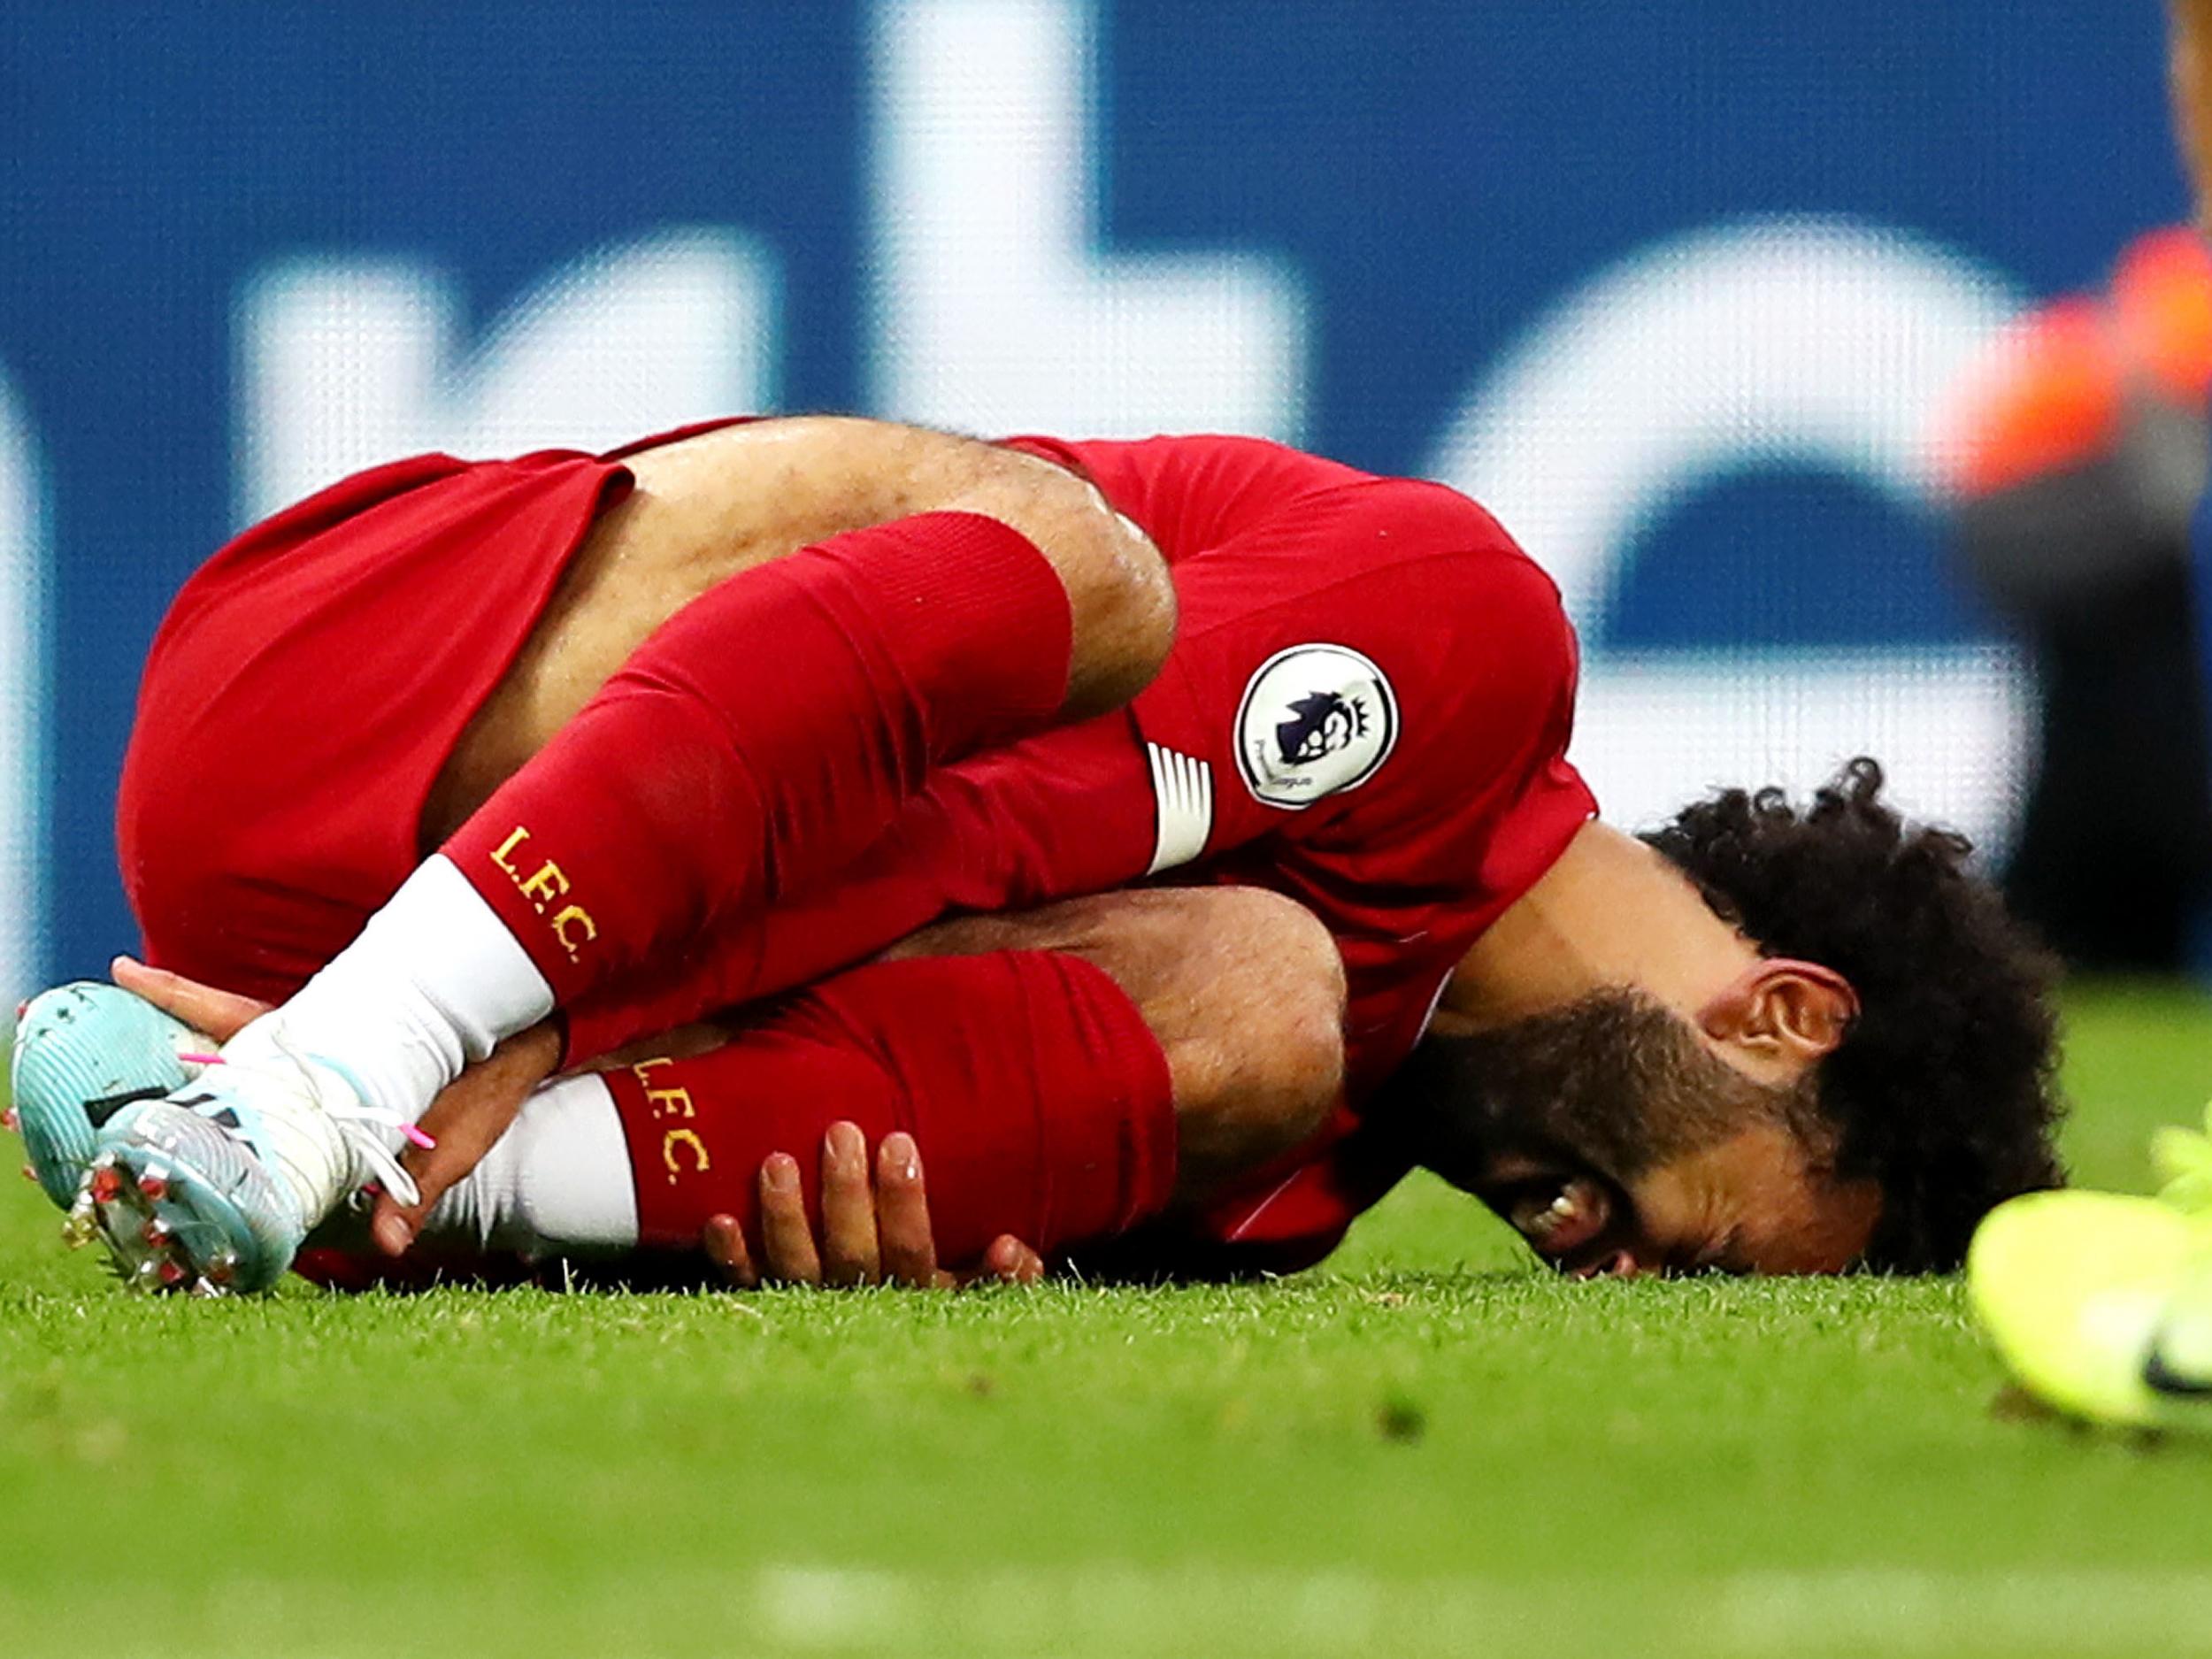 Aston Villa vs Liverpool: Jurgen Klopp confirms Mohamed Salah injury as ankle issue forces him out of training